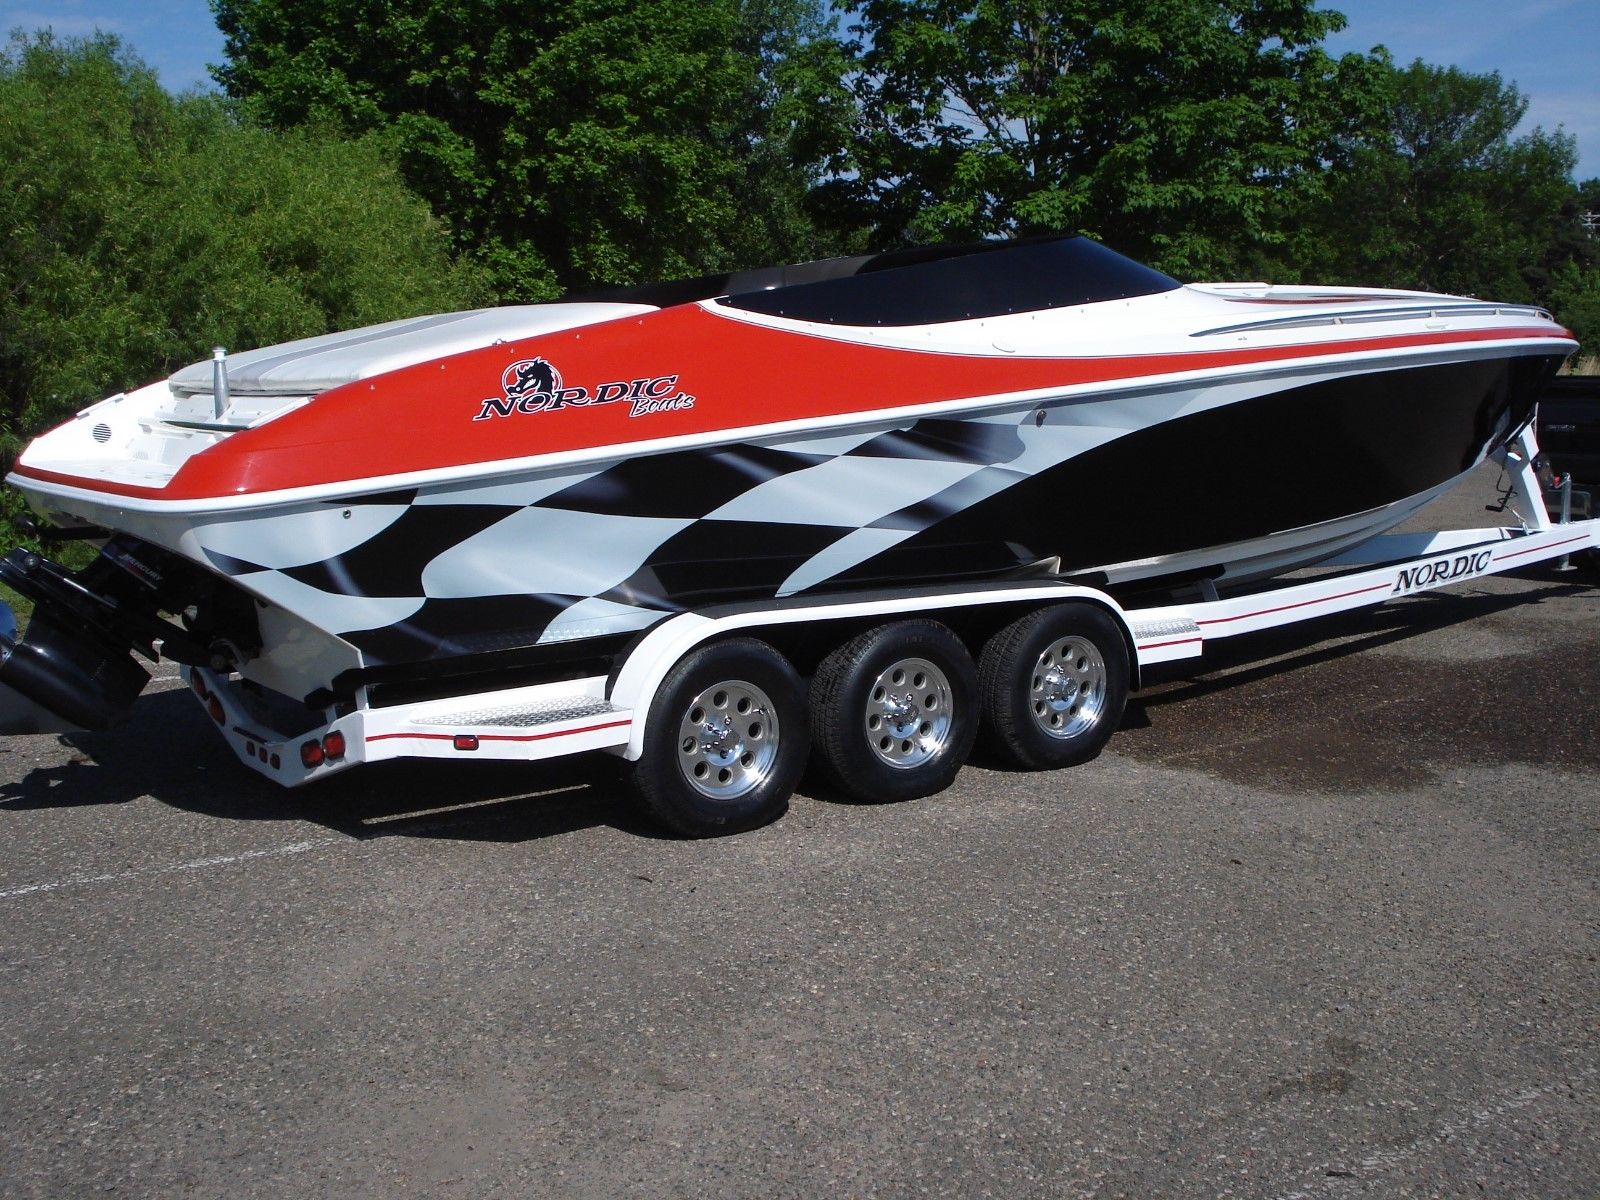 Nordic Power Boats 28 Heat Closed Bow 2002 for sale for $39,500 - Boats ...